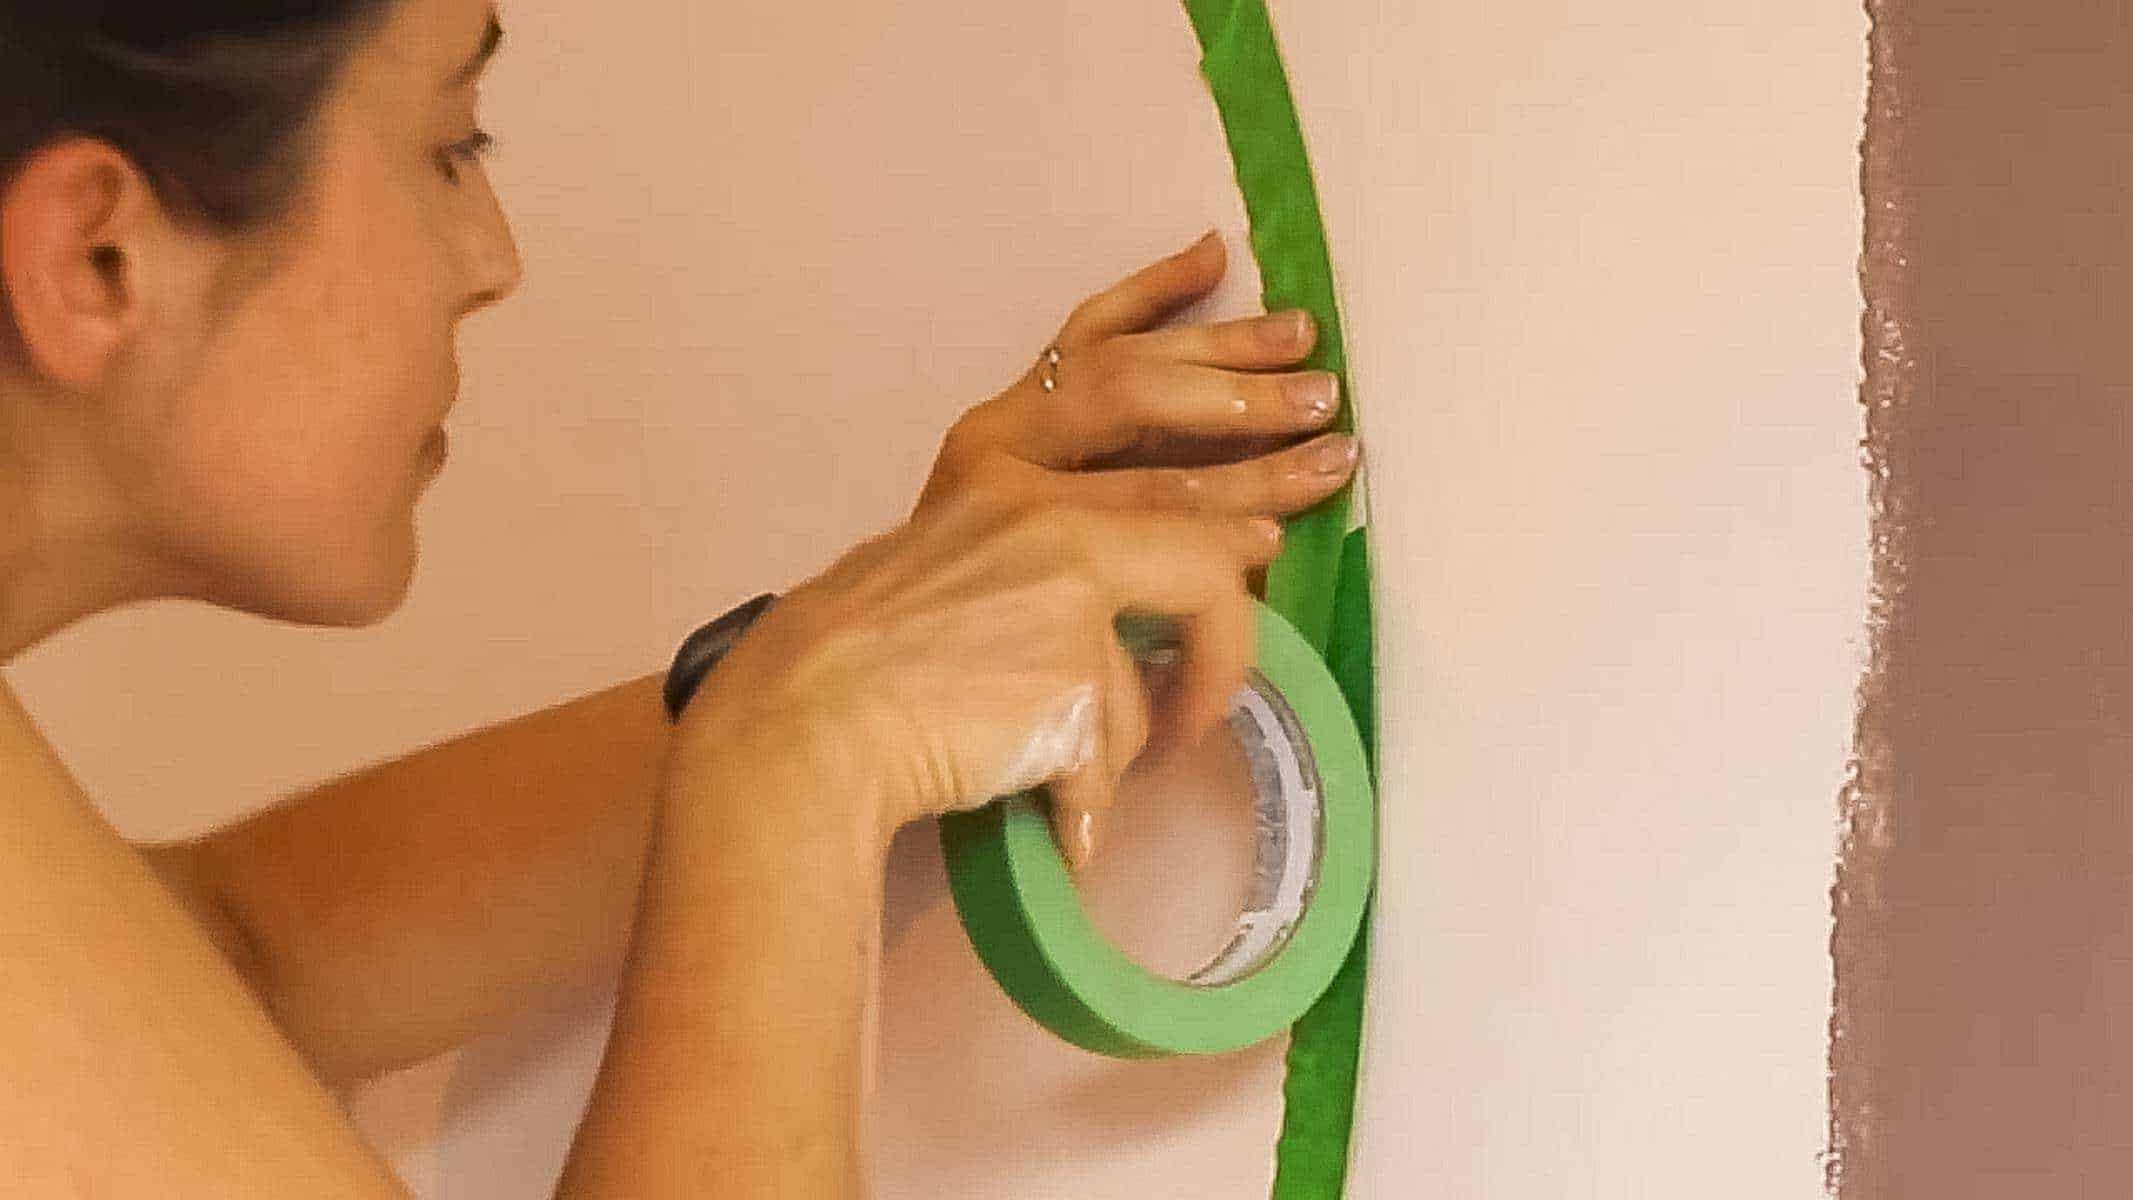 stick the mask on a circle with green frog tape